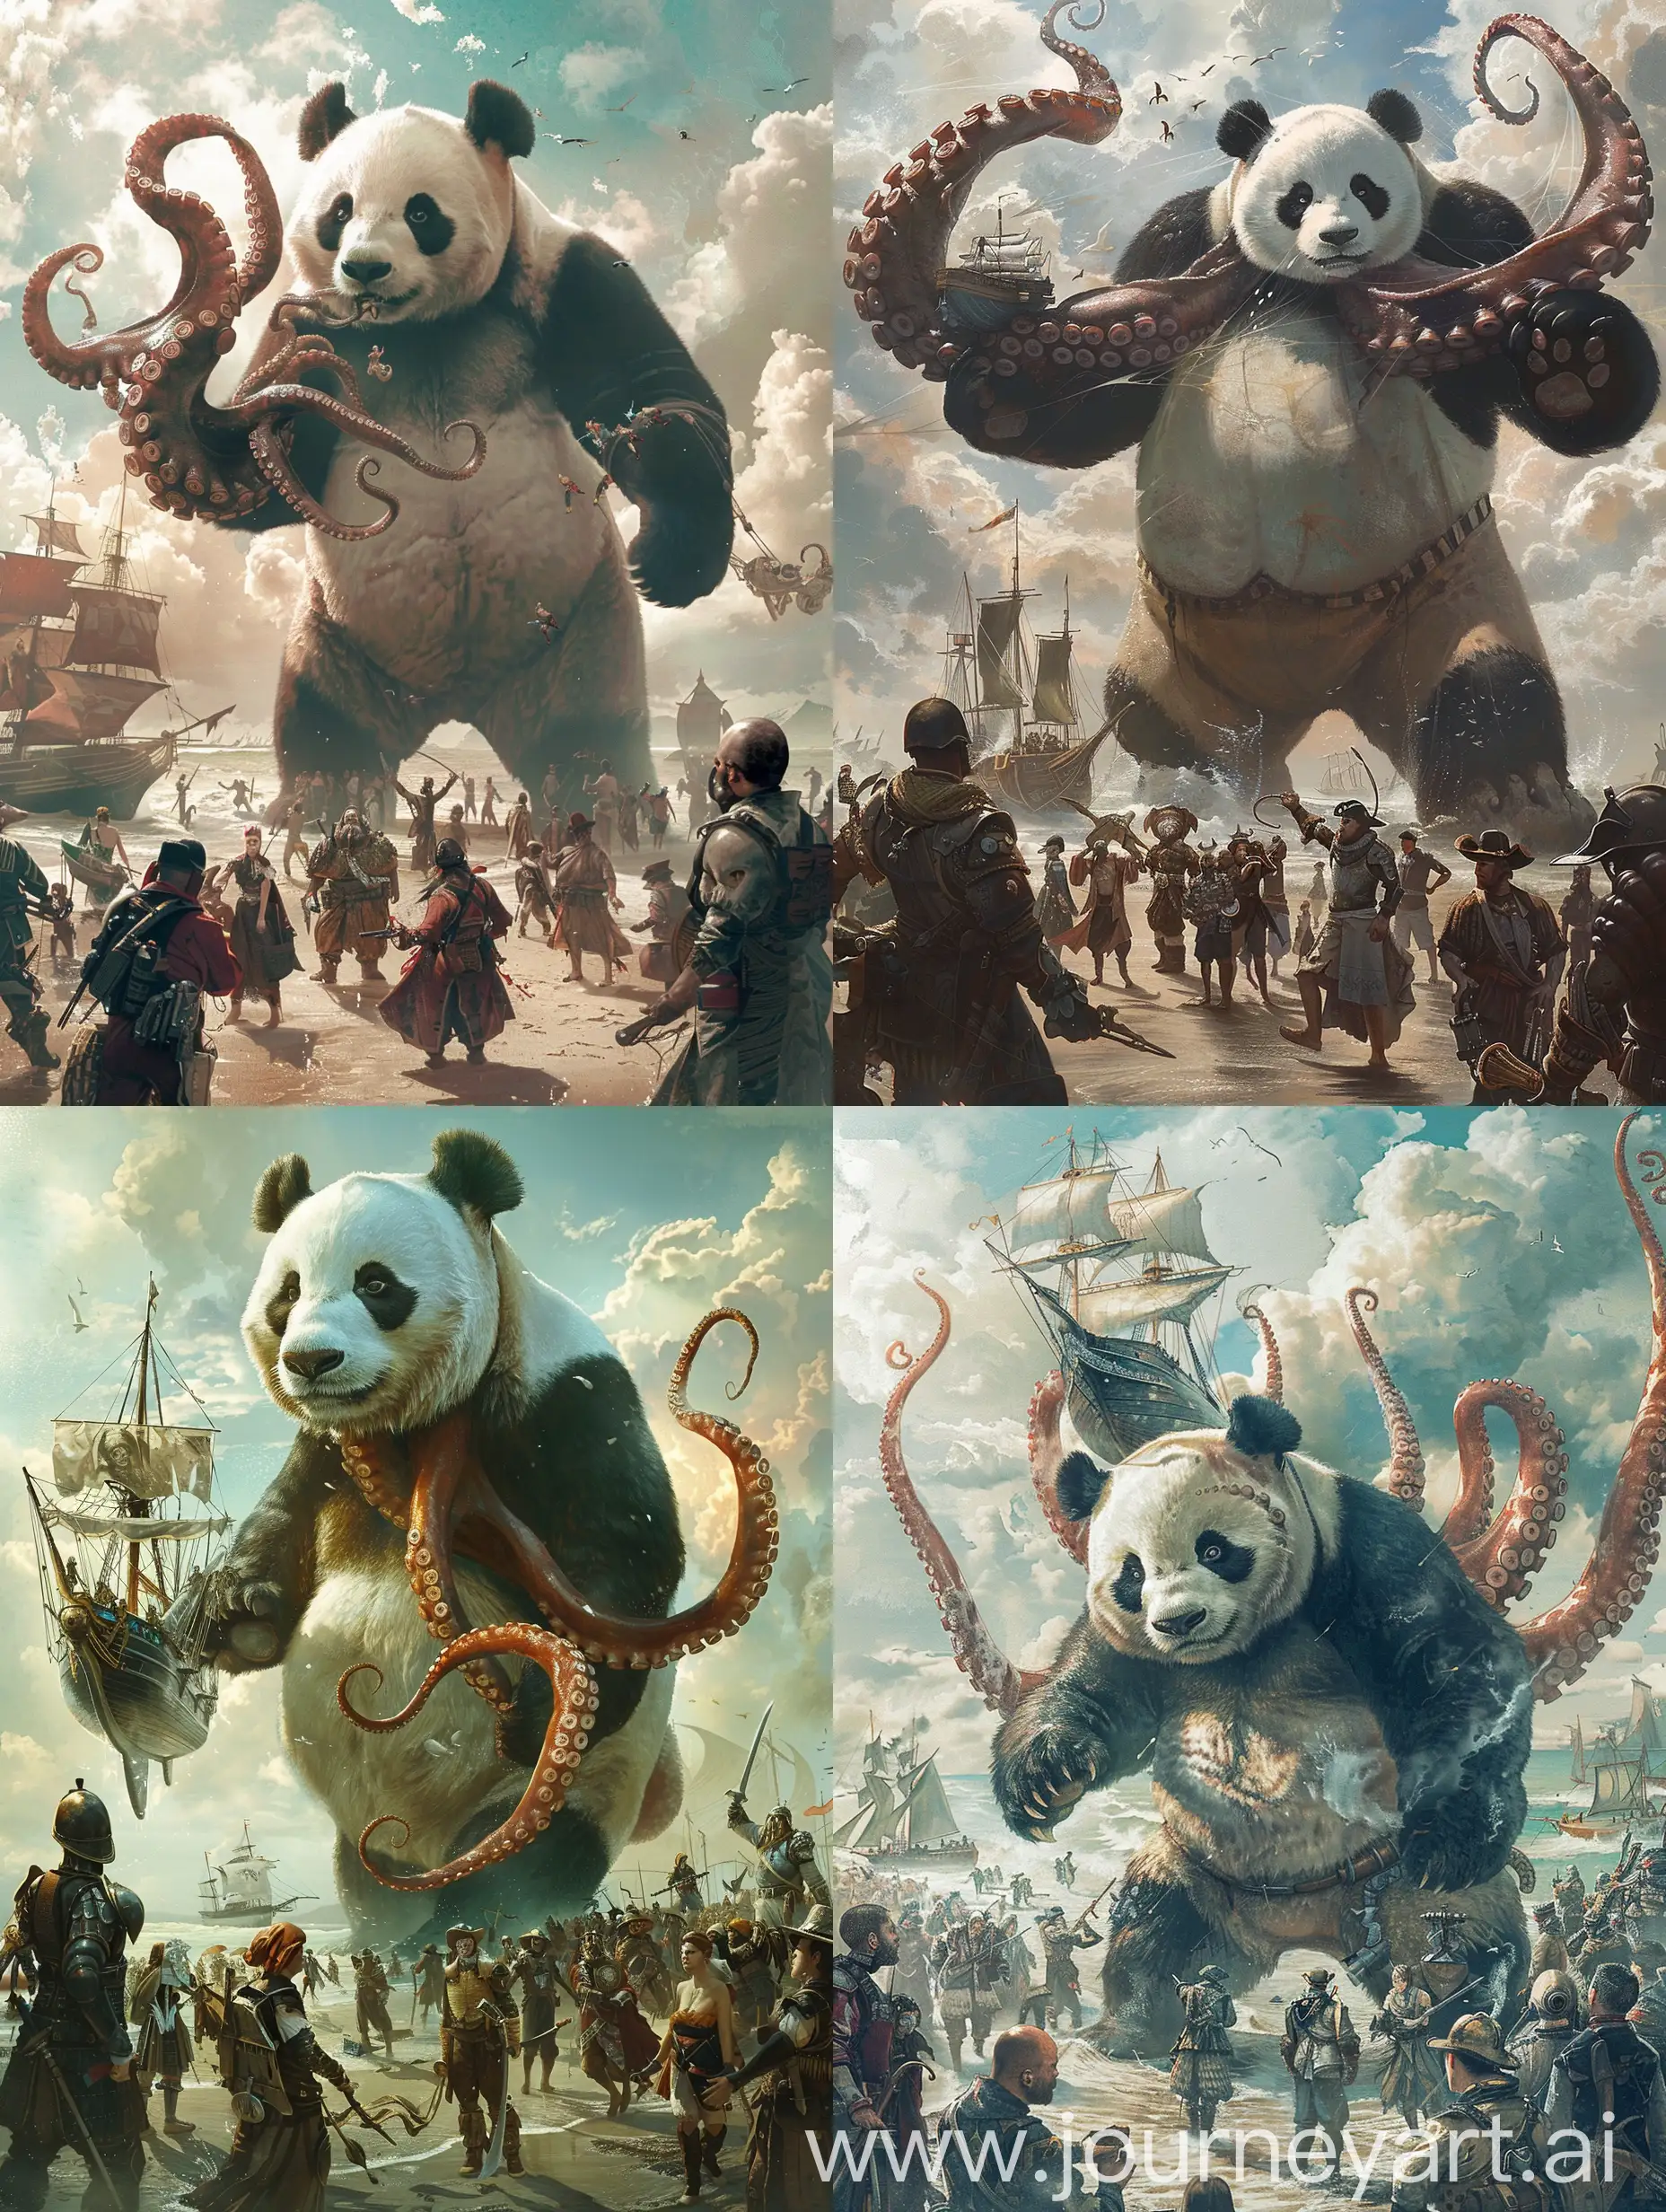 In the image, there is a giant panda bear with an octopus for a head, standing on a beach with many people around. The panda bear is holding a ship in its tentacles, and there are people in various outfits, some carrying weapons. The sky is filled with clouds, and the overall atmosphere is surreal and mysterious.